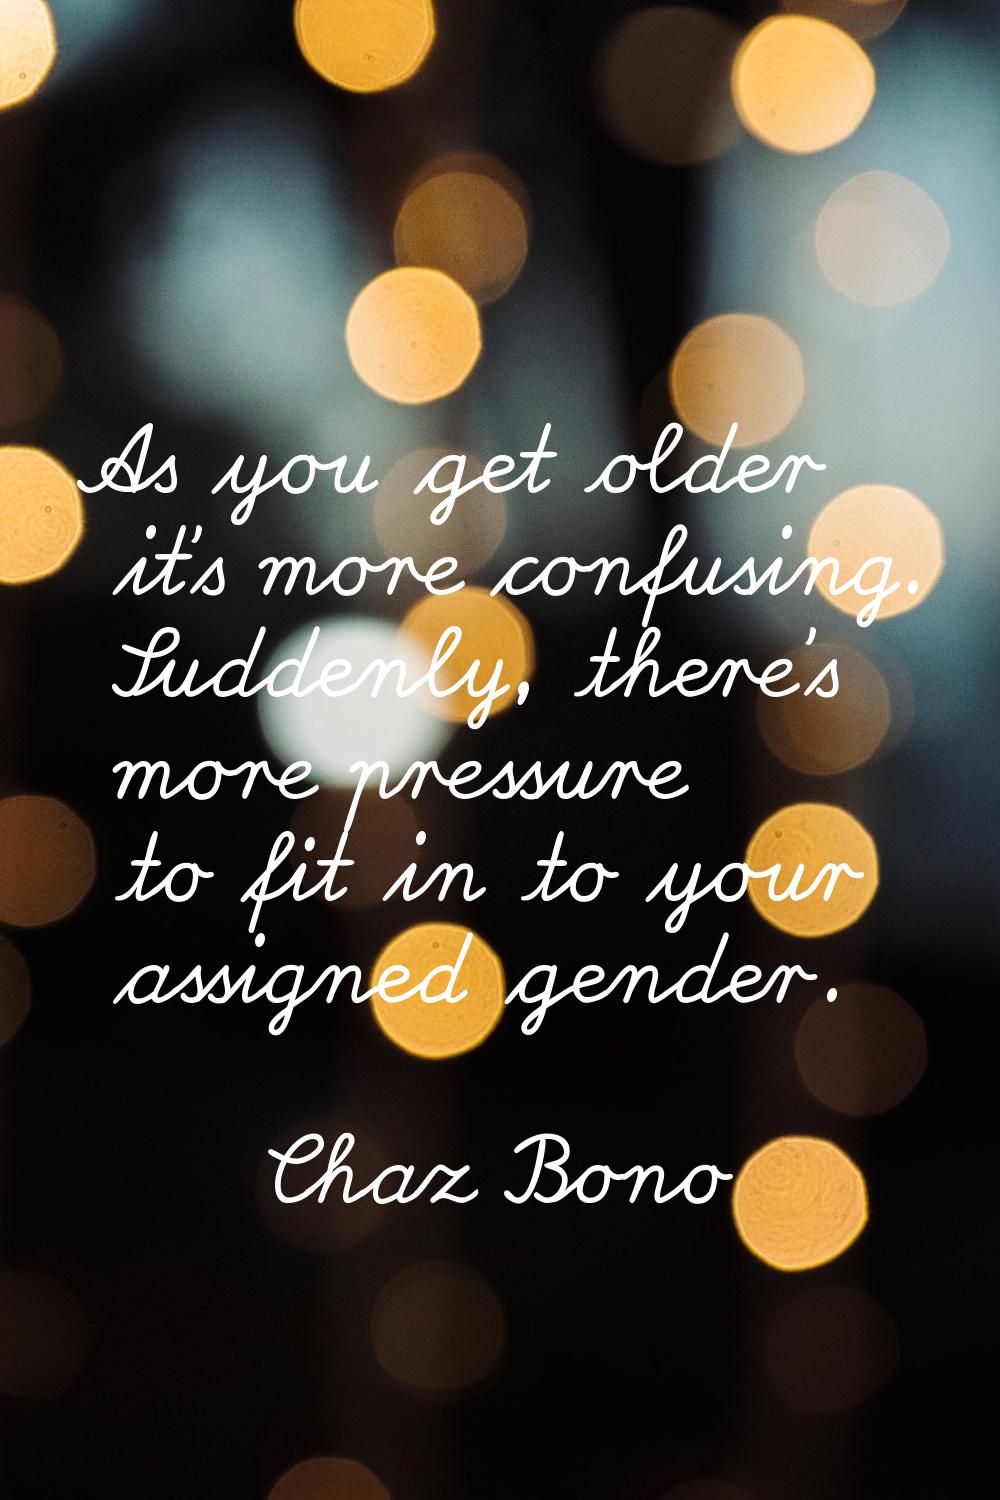 As you get older it's more confusing. Suddenly, there's more pressure to fit in to your assigned ge